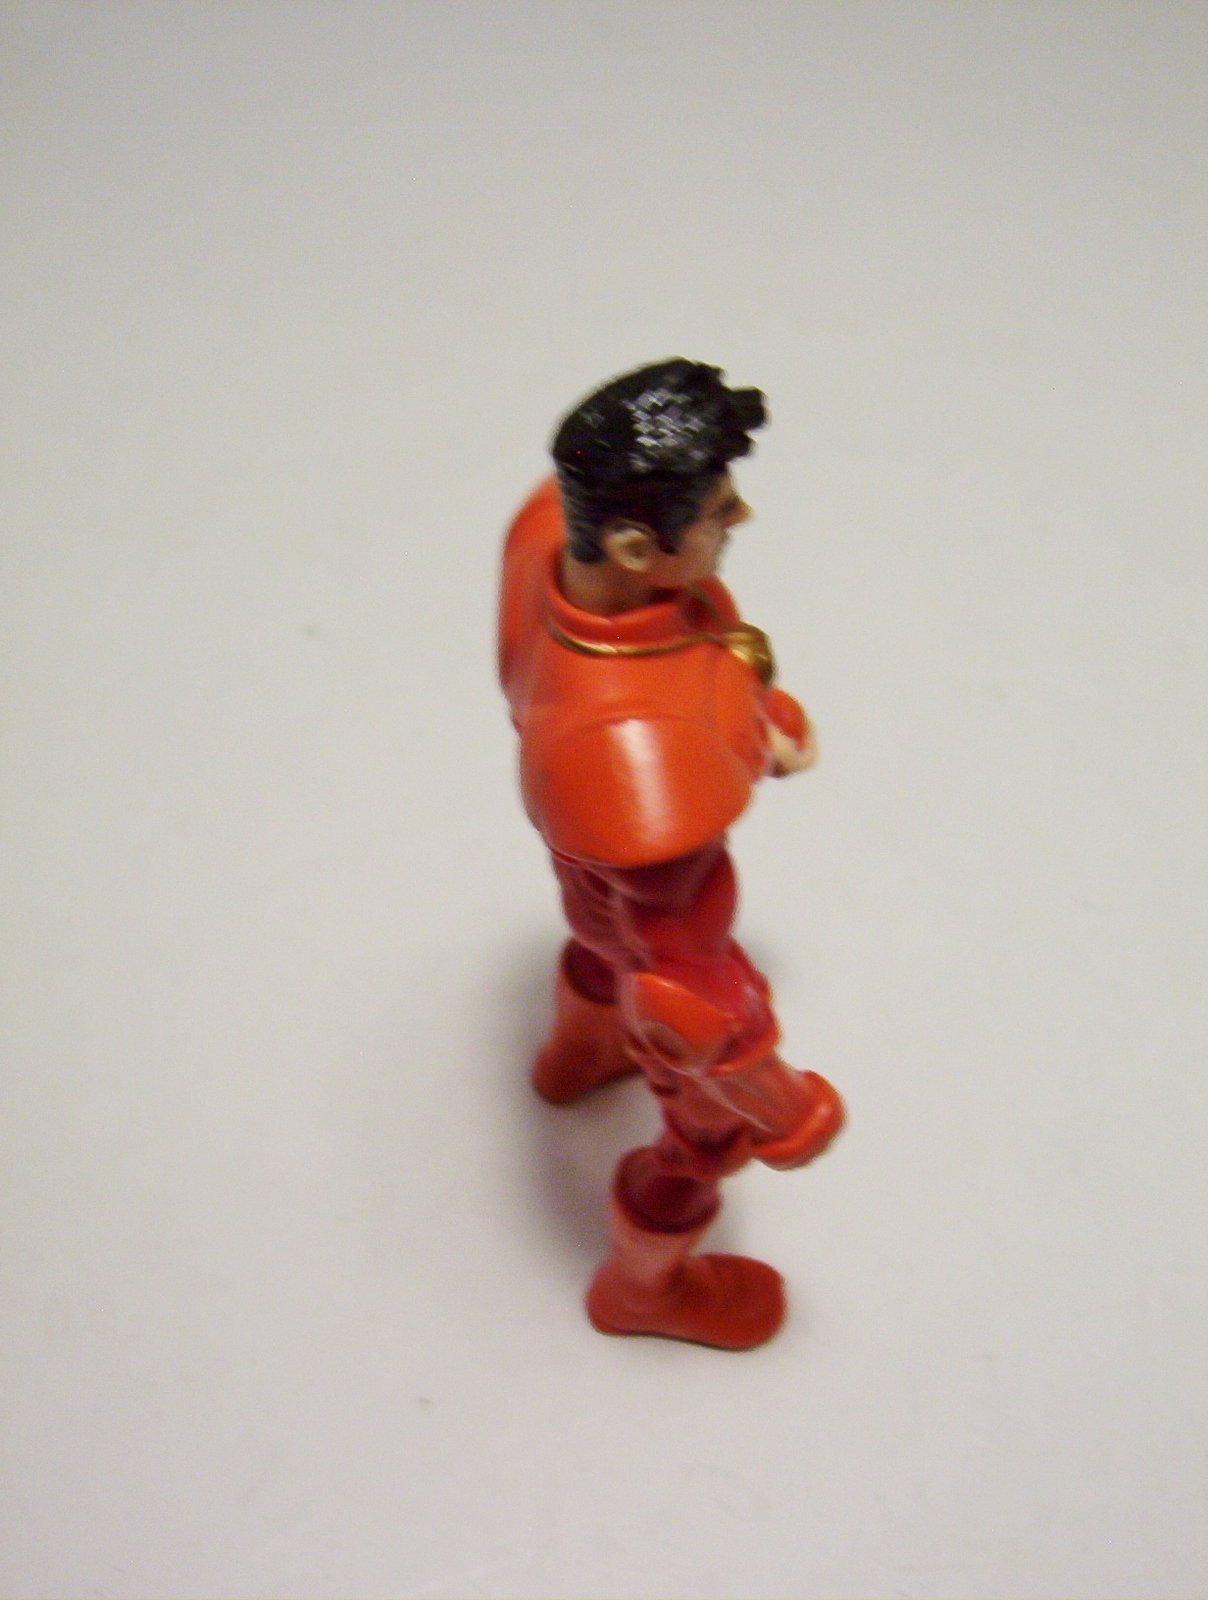 2000 Project Backstreet Boys Burger King Toy Kevin as Power Lord 